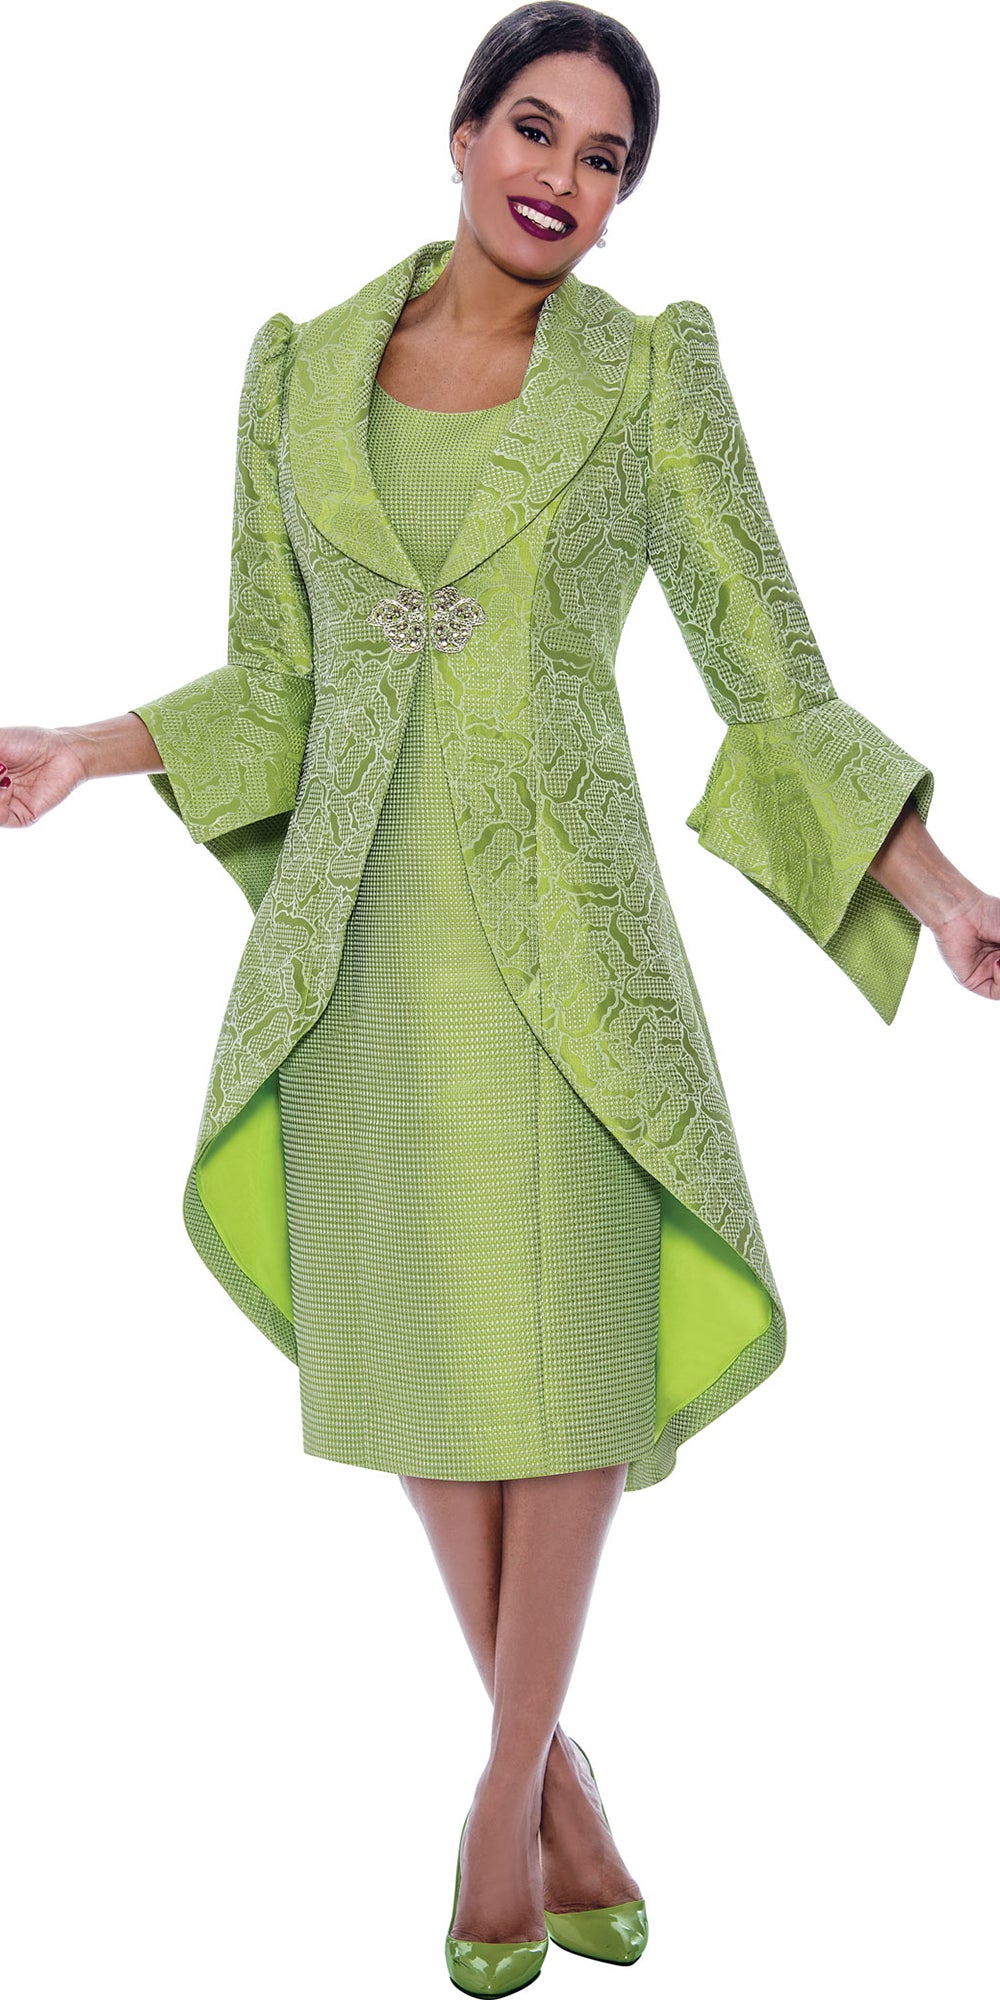 Divine Queen 2312 - Lime - 2PC Jacquard Dress and Jacket